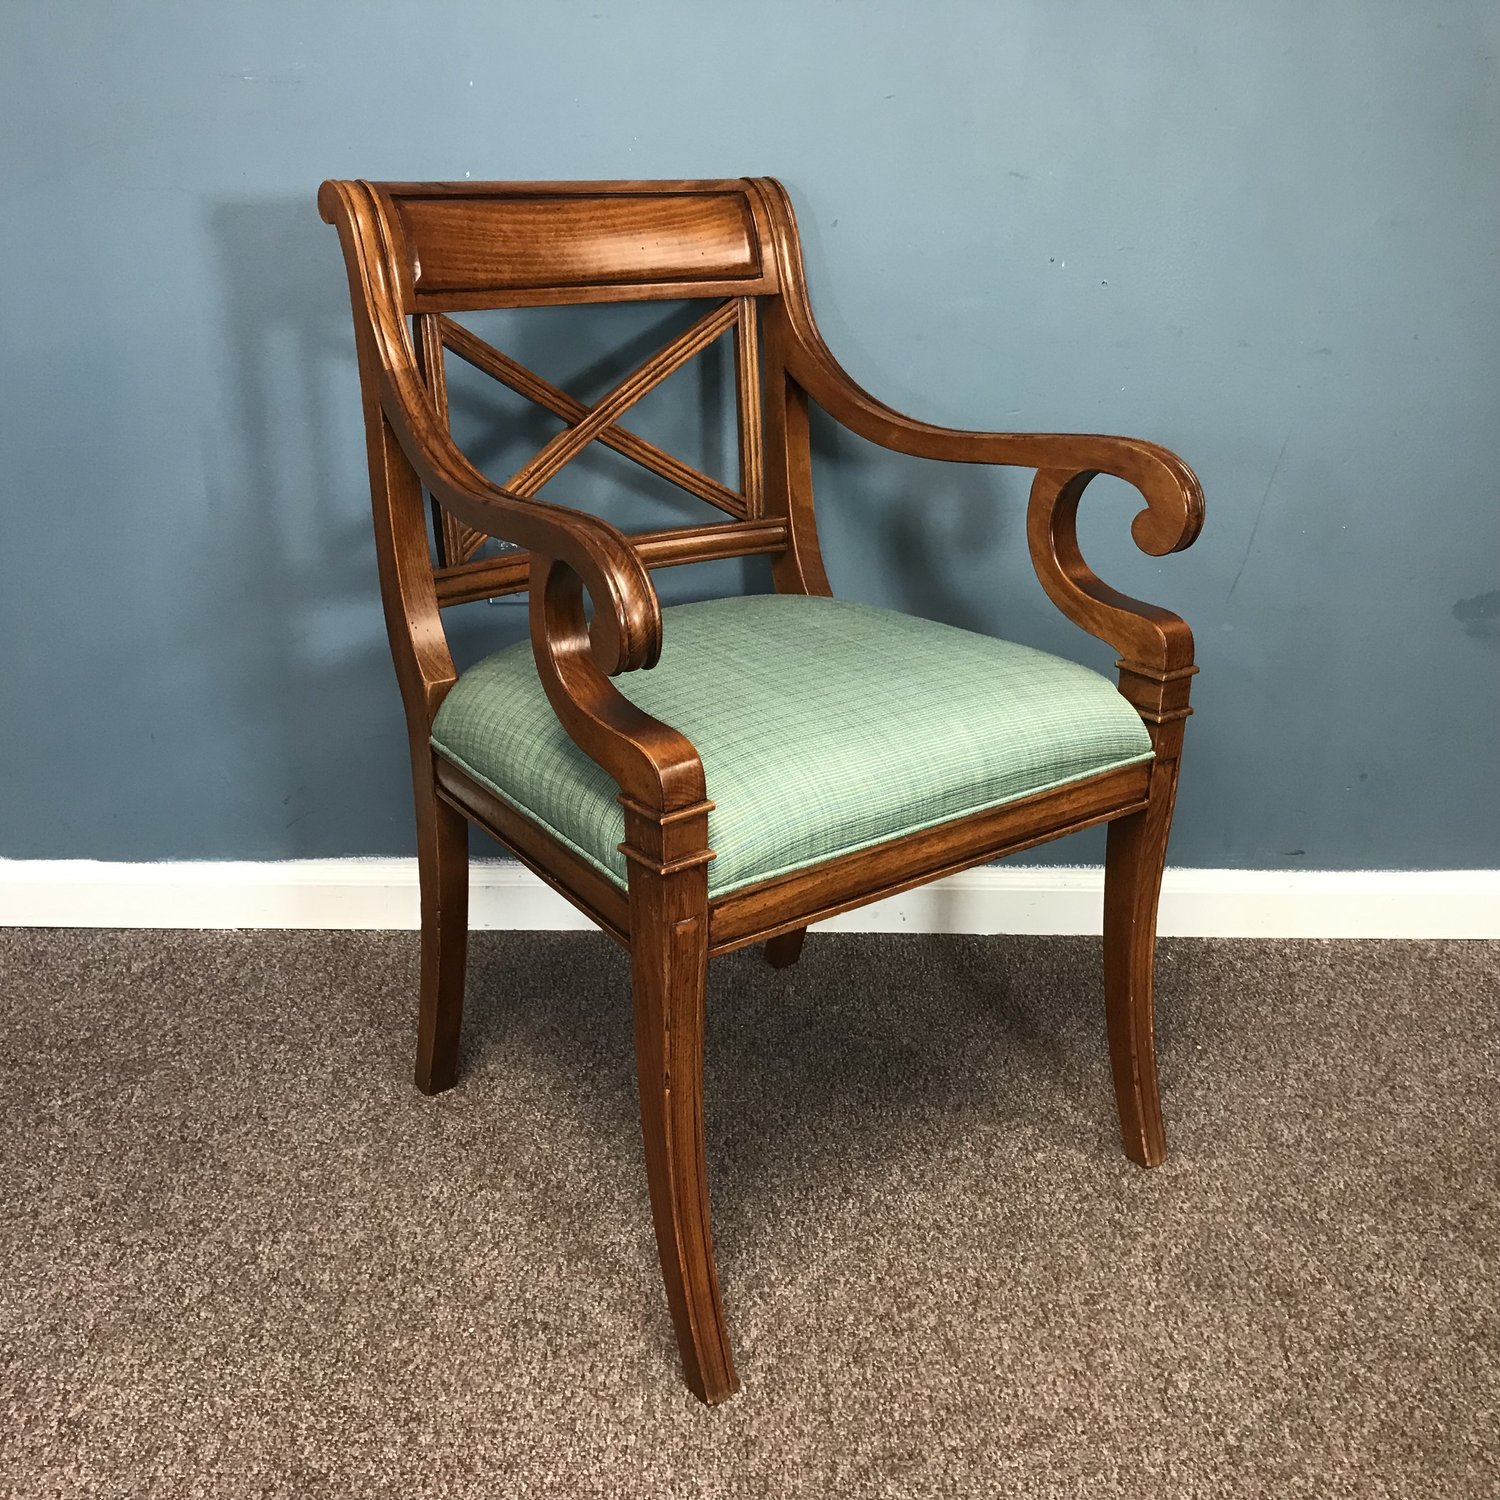 Baker King Louis Xvi Carved Chair